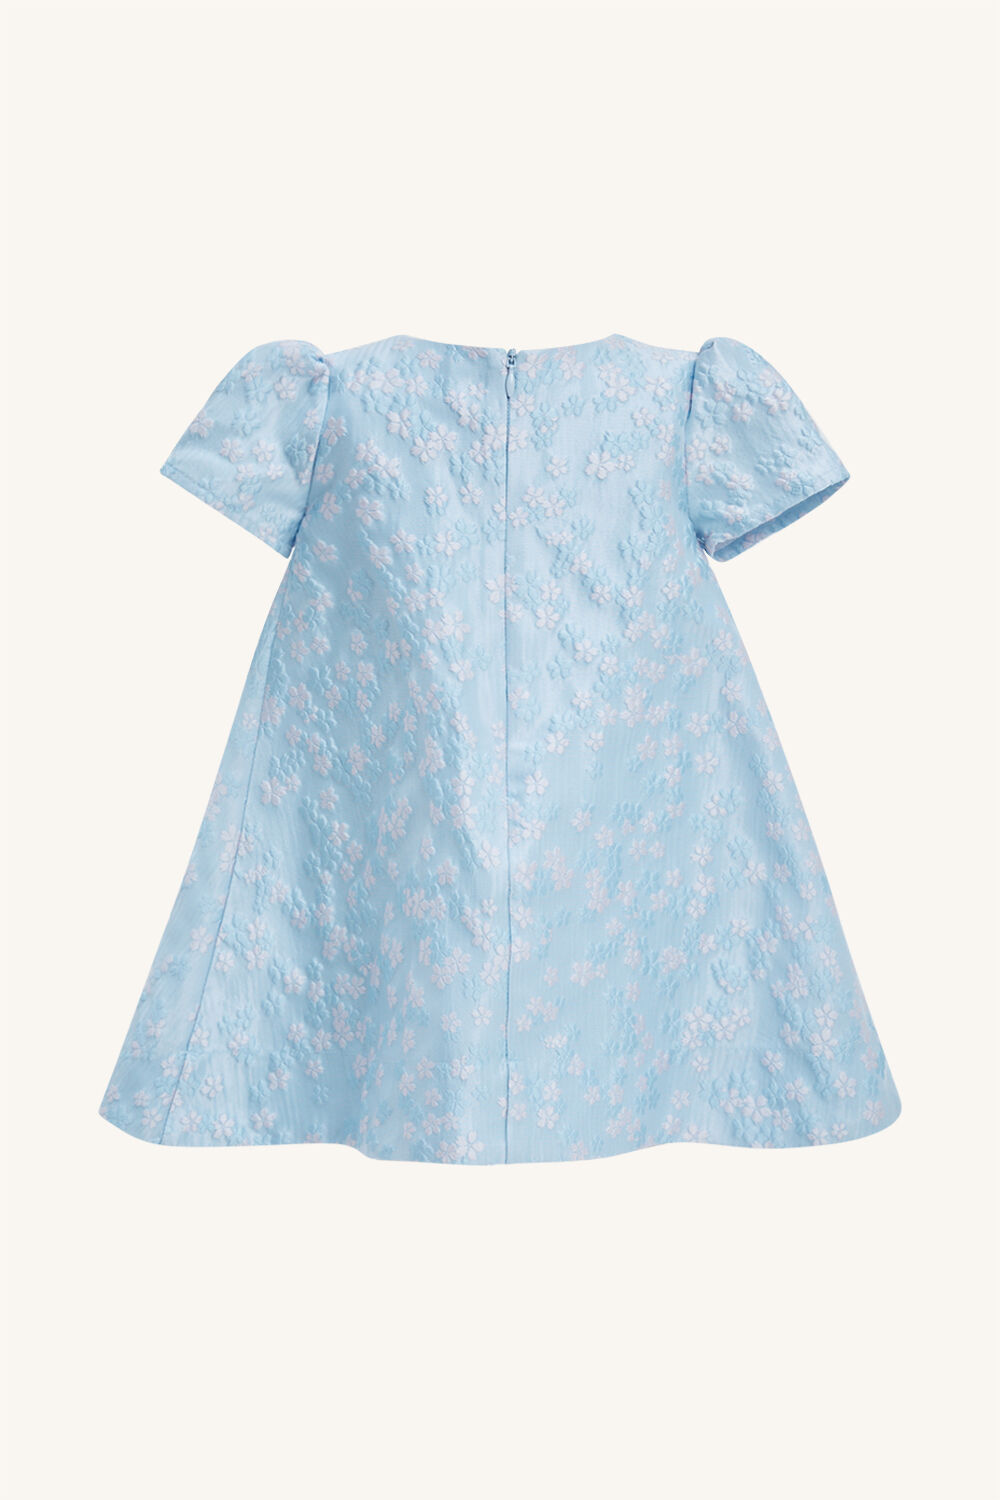 MEADOW BOW DRESS in colour BABY BLUE